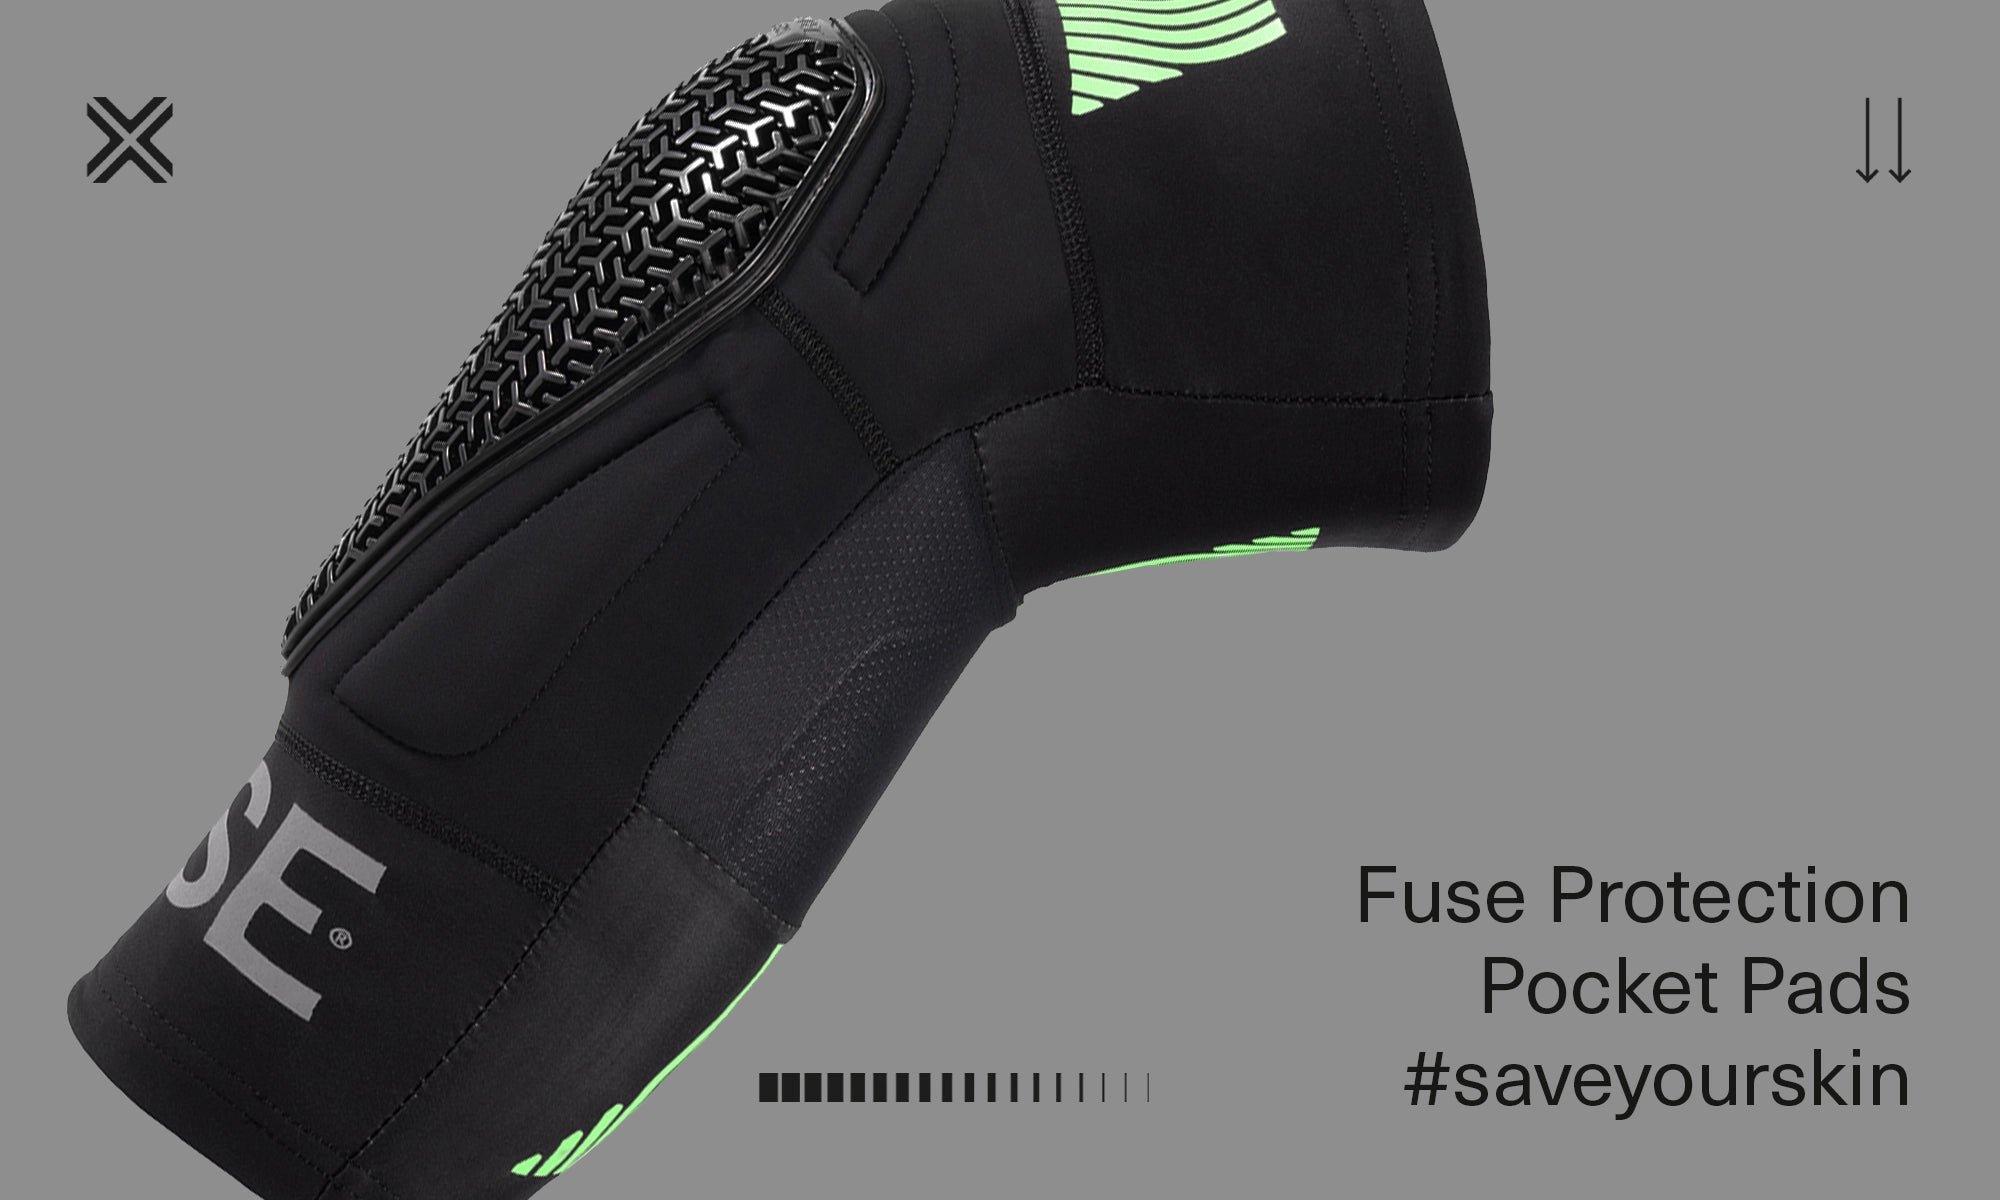 Fuse protection pocket pads